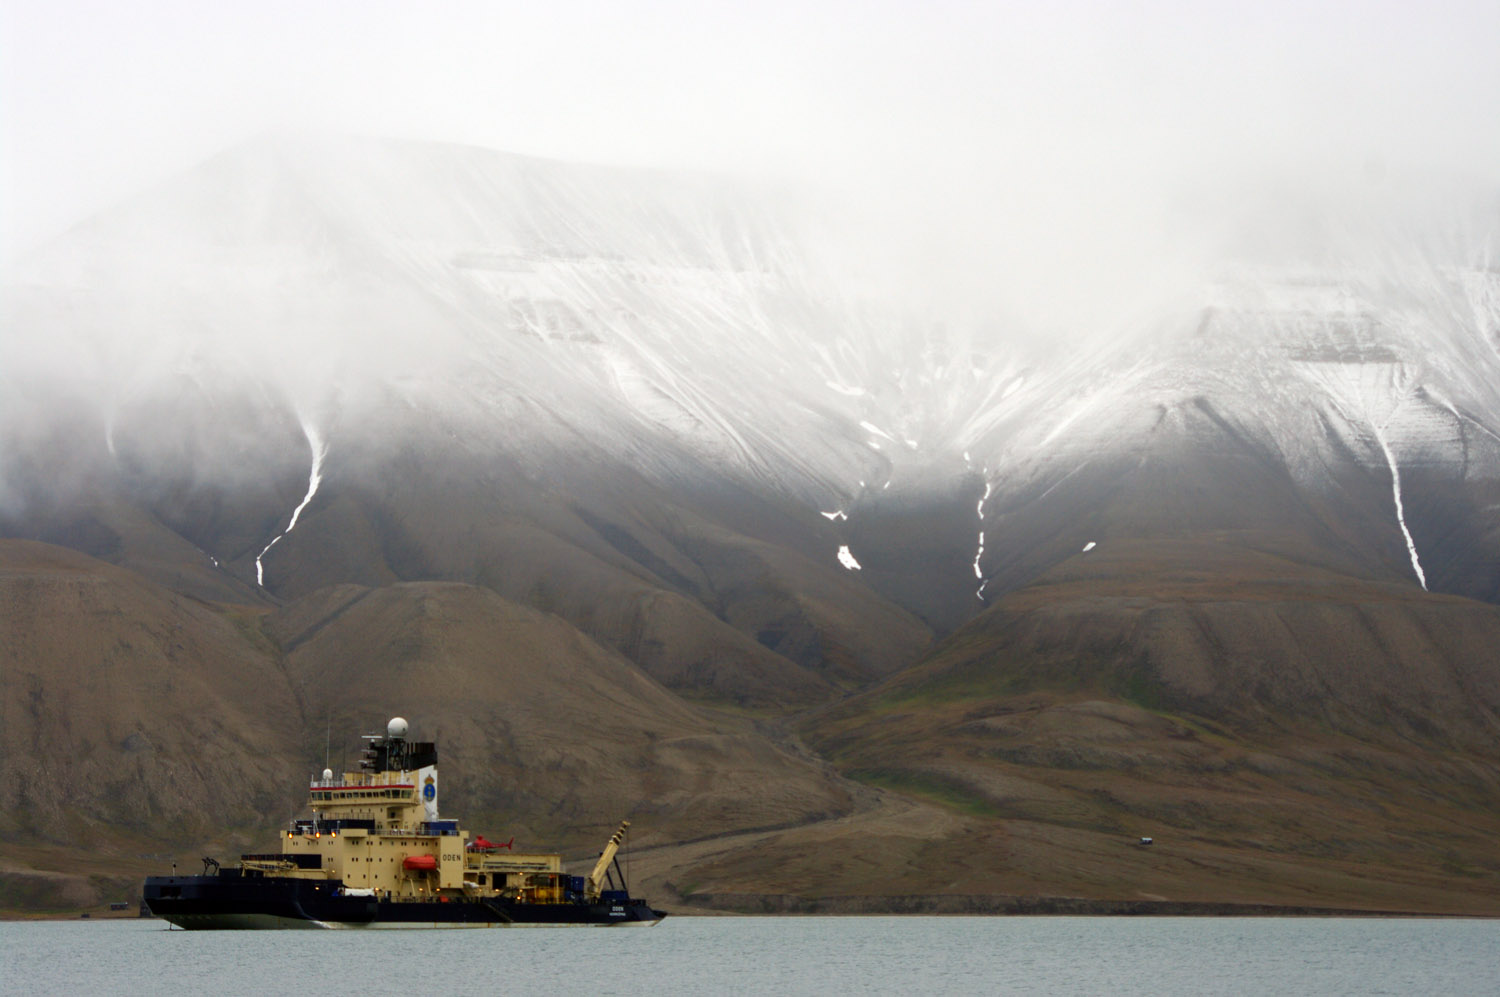 Ships and Boats, Svalbard - 16 - Oden, Icebreaker